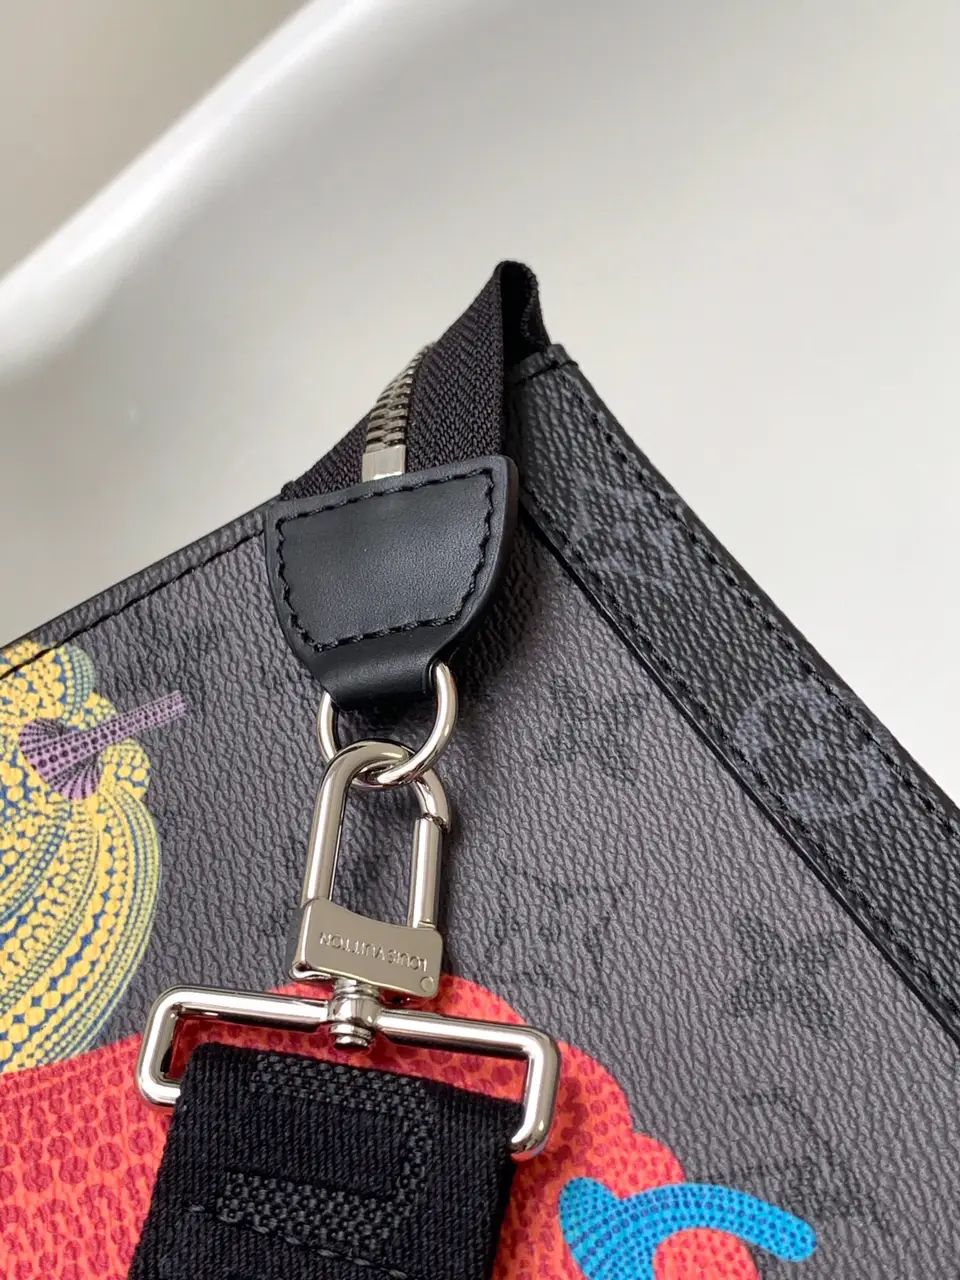 Classic LV pumpkin bag, Gallery posted by Dreamer